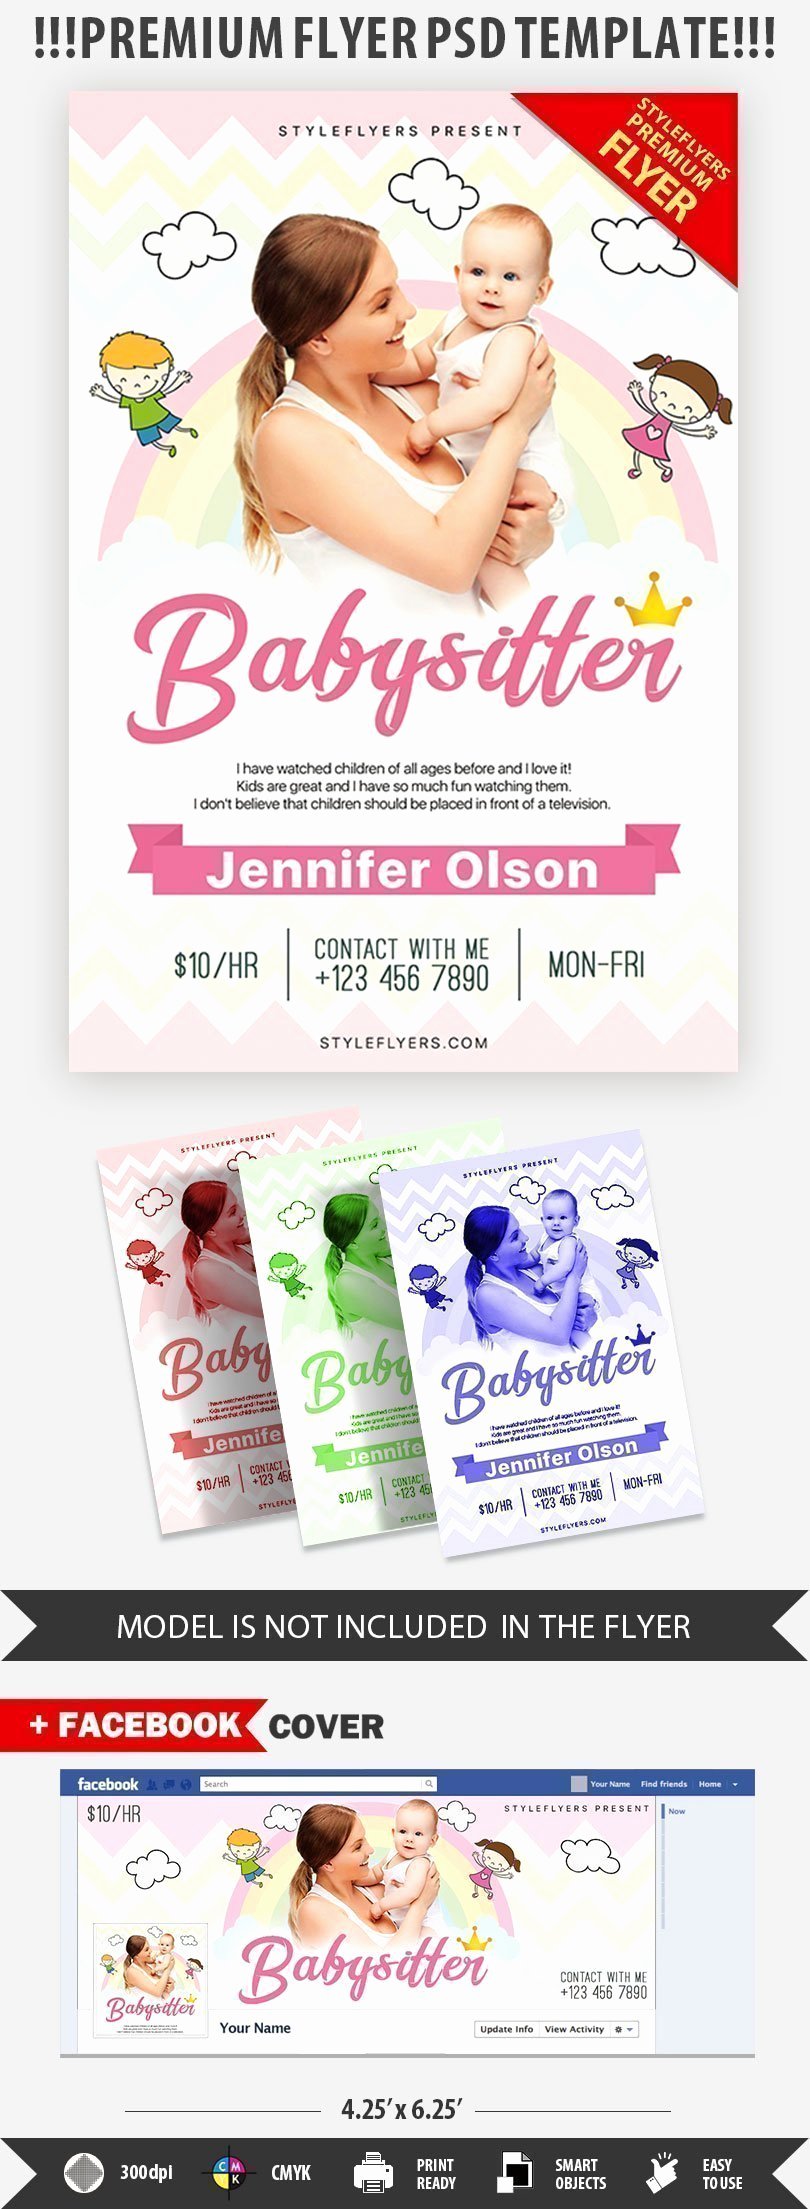 Babysitting Flyer Template Free Unique Babysitting Psd Flyer Template Styleflyers